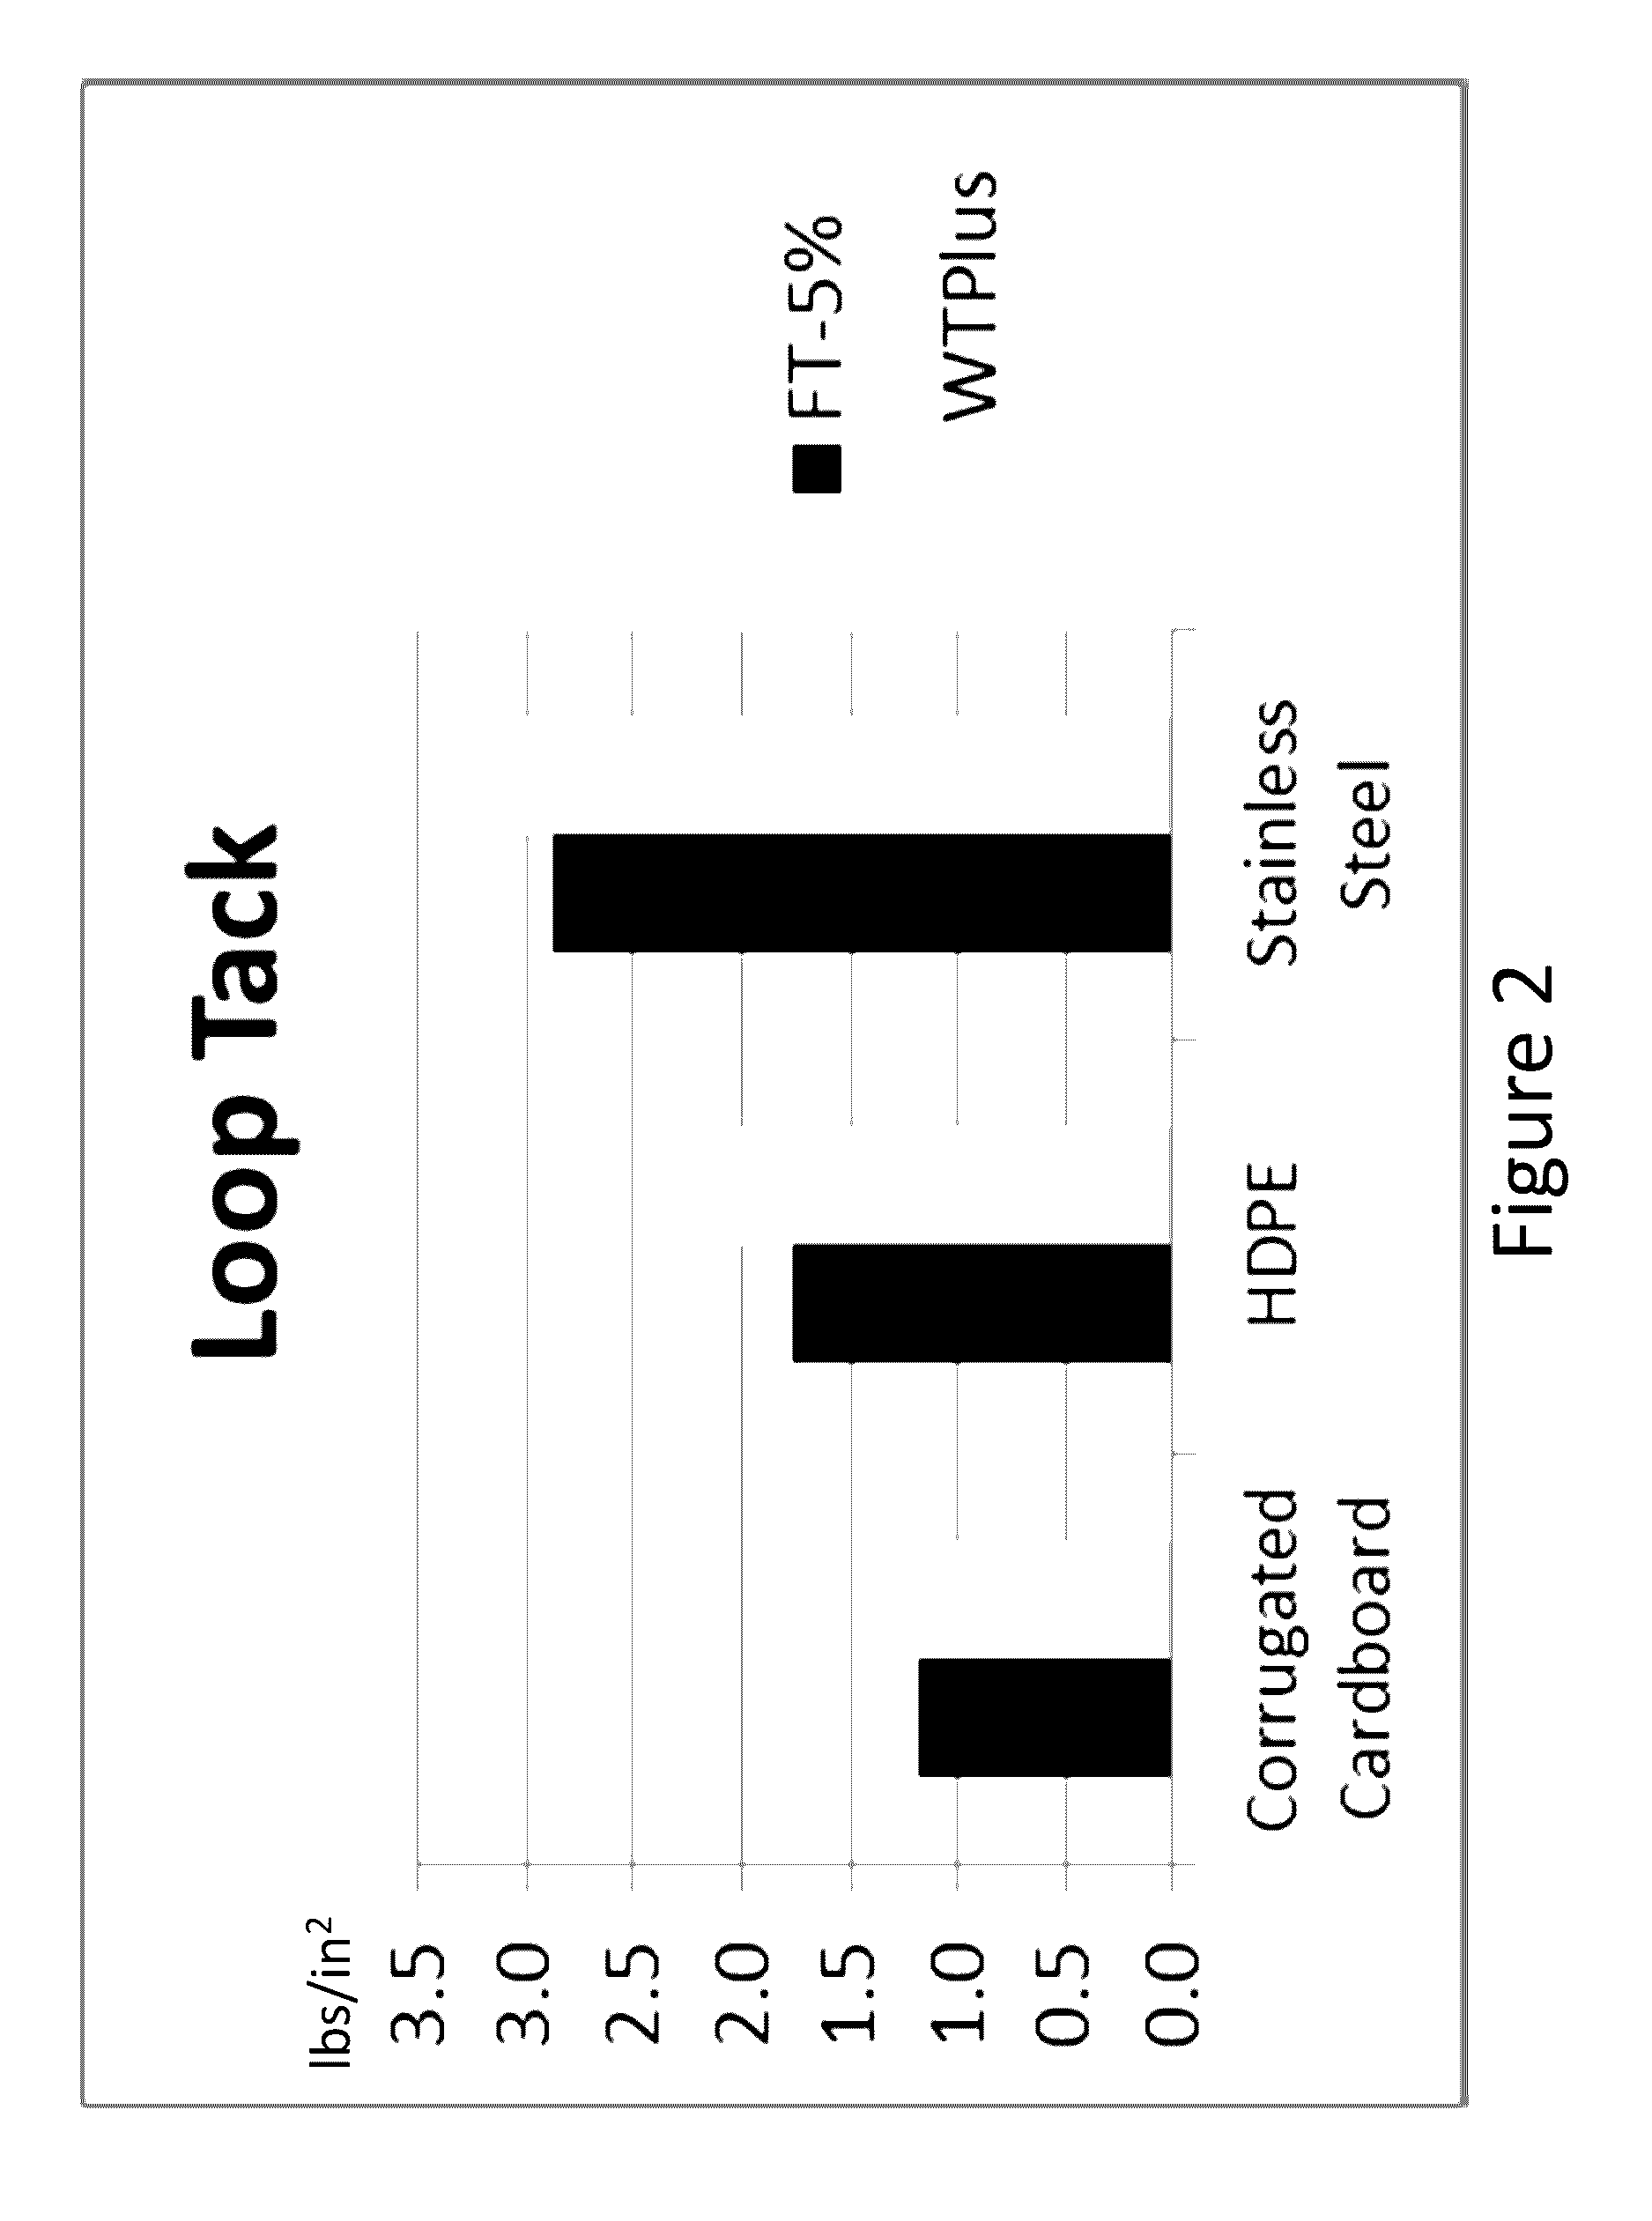 Farnesene-based tackifying resins and adhesive compositions containing the same